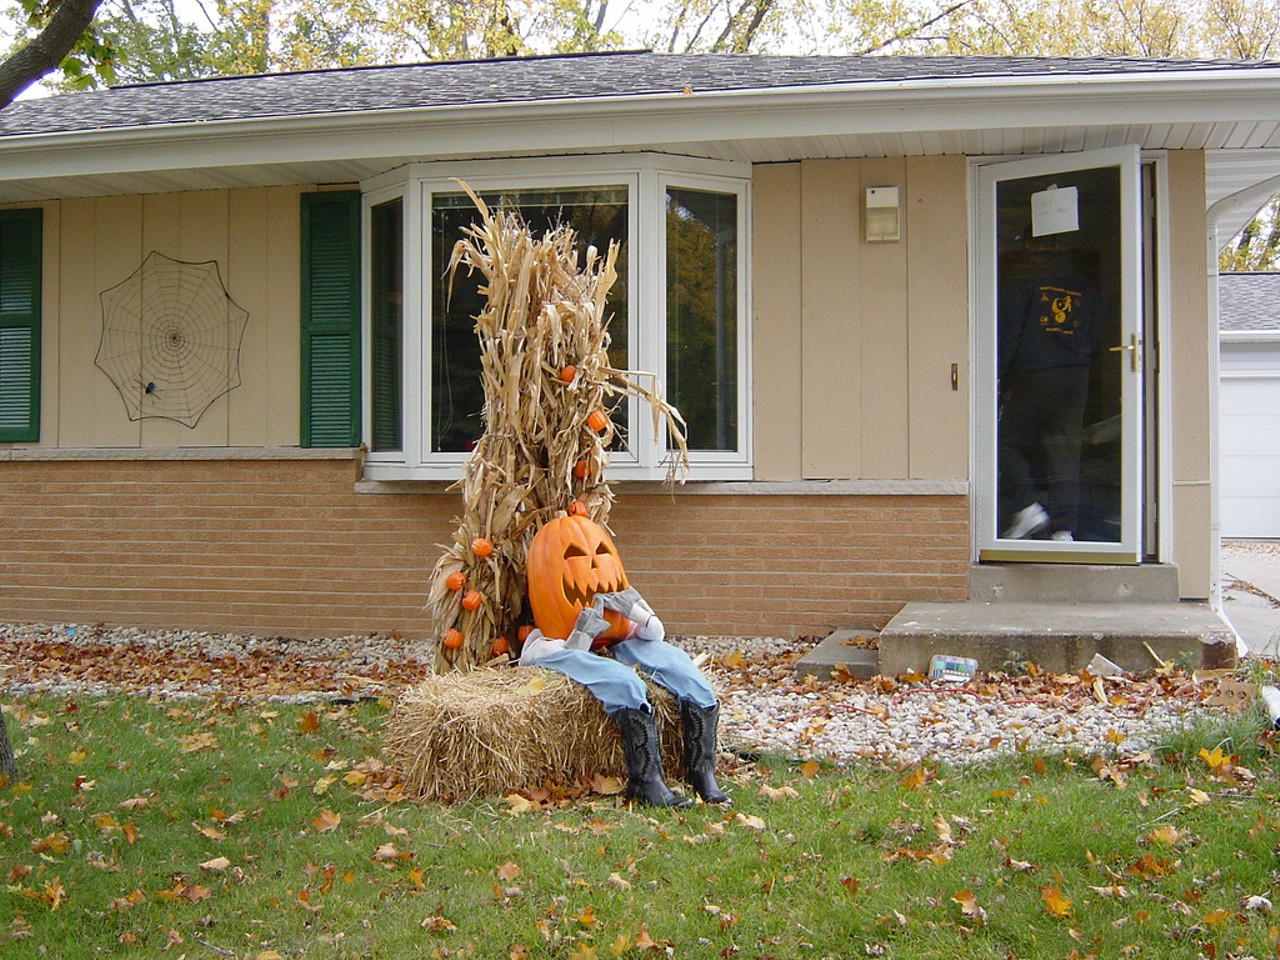 TELLING JOKES ON HALLOWEEN NIGHT WHEN TRICK-OR-TREATING
Kids in other cities don't have to tell jokes, they just get candy handed to them without even earning it. Slackers.
Photo courtesy of Jim Trottier / Flickr